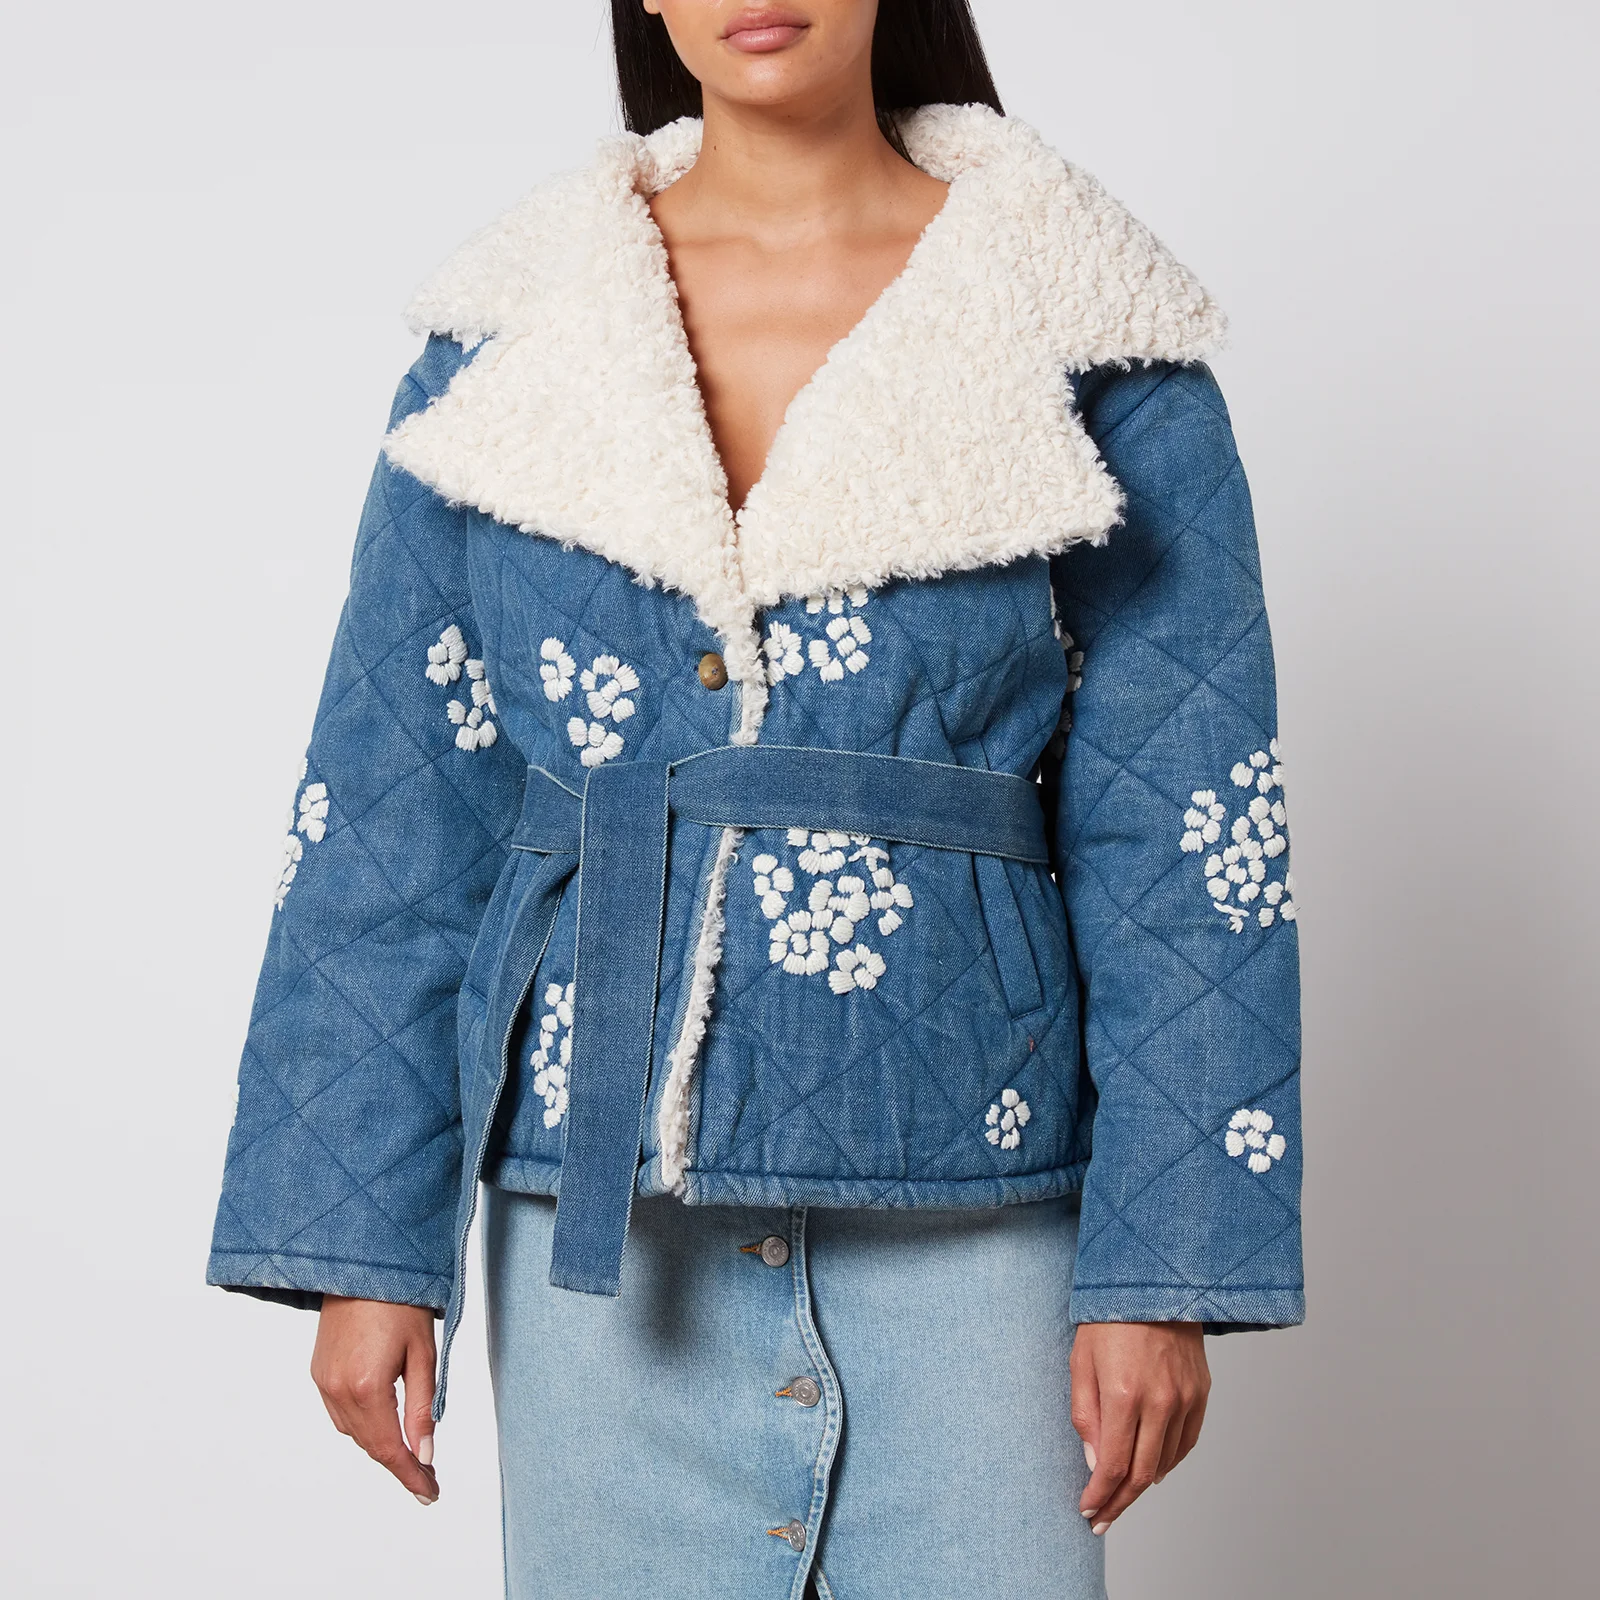 Tach Wilma Floral-Embrodiered Denim and Sherpa Jacket Image 1